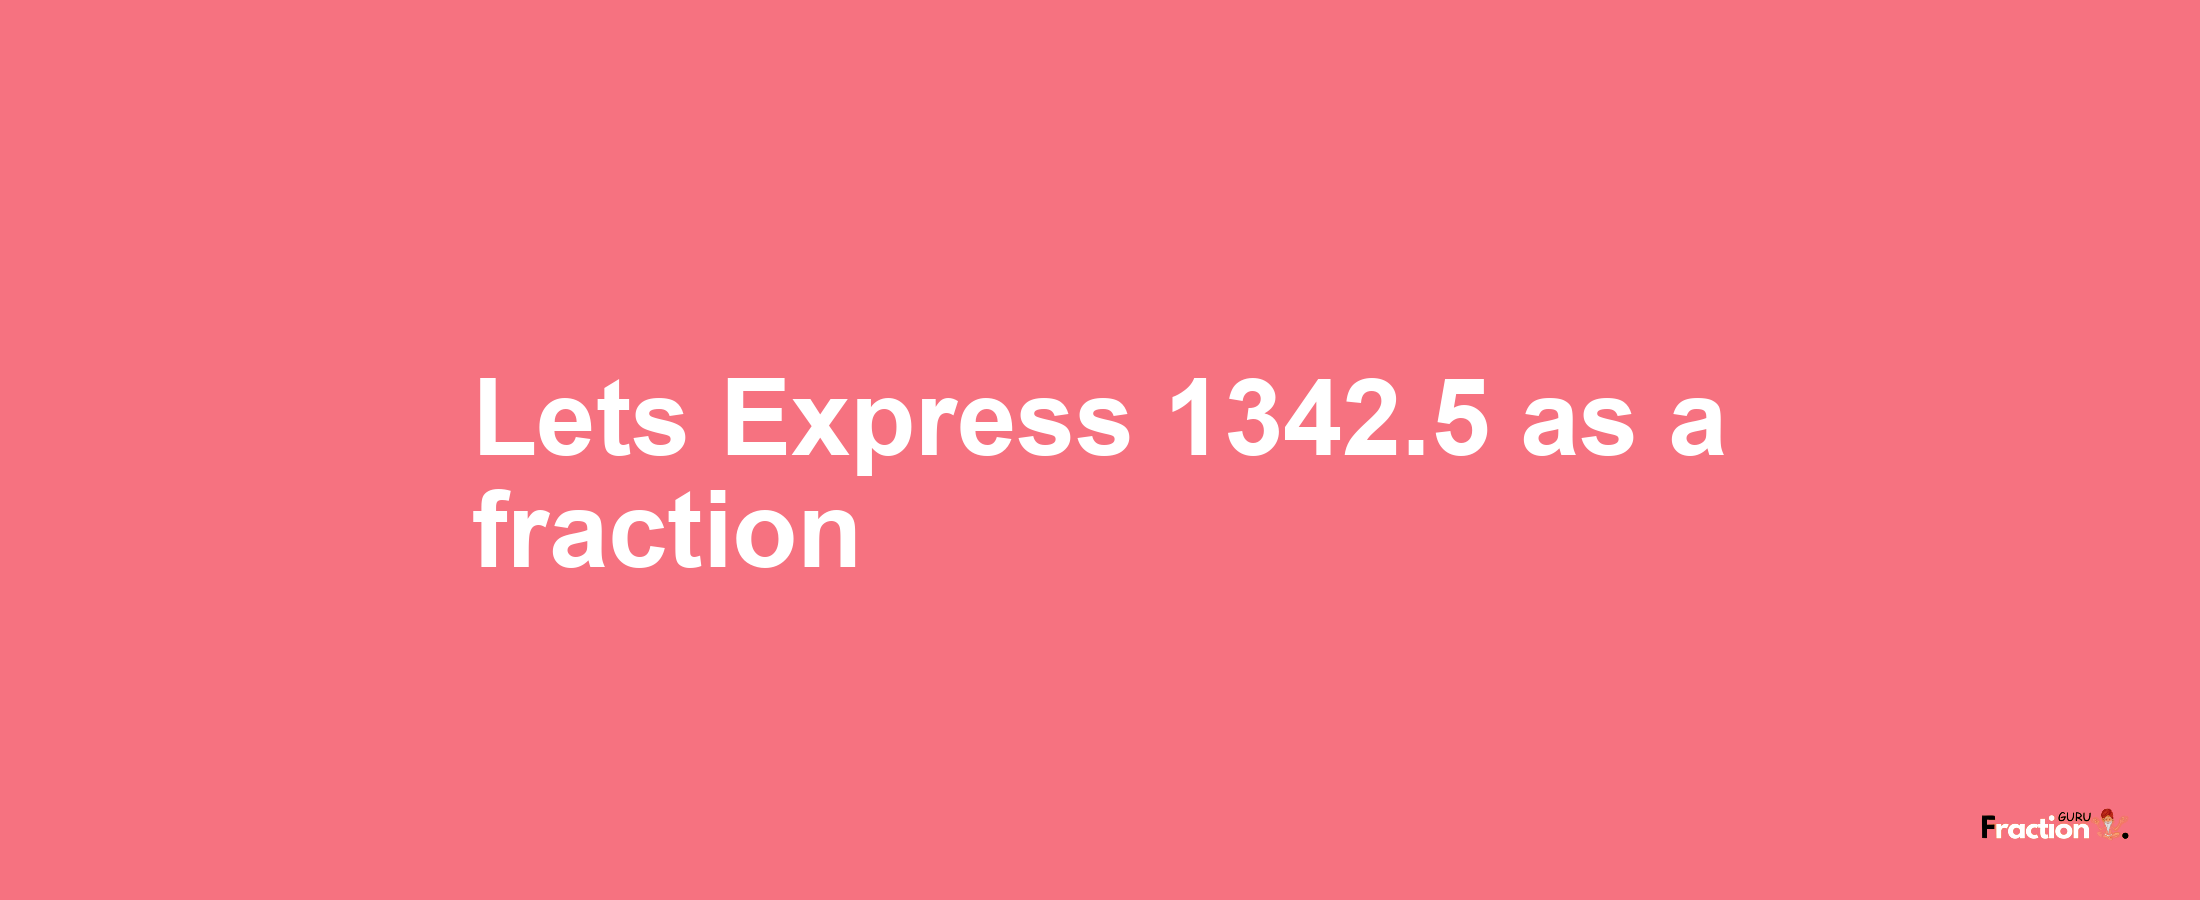 Lets Express 1342.5 as afraction